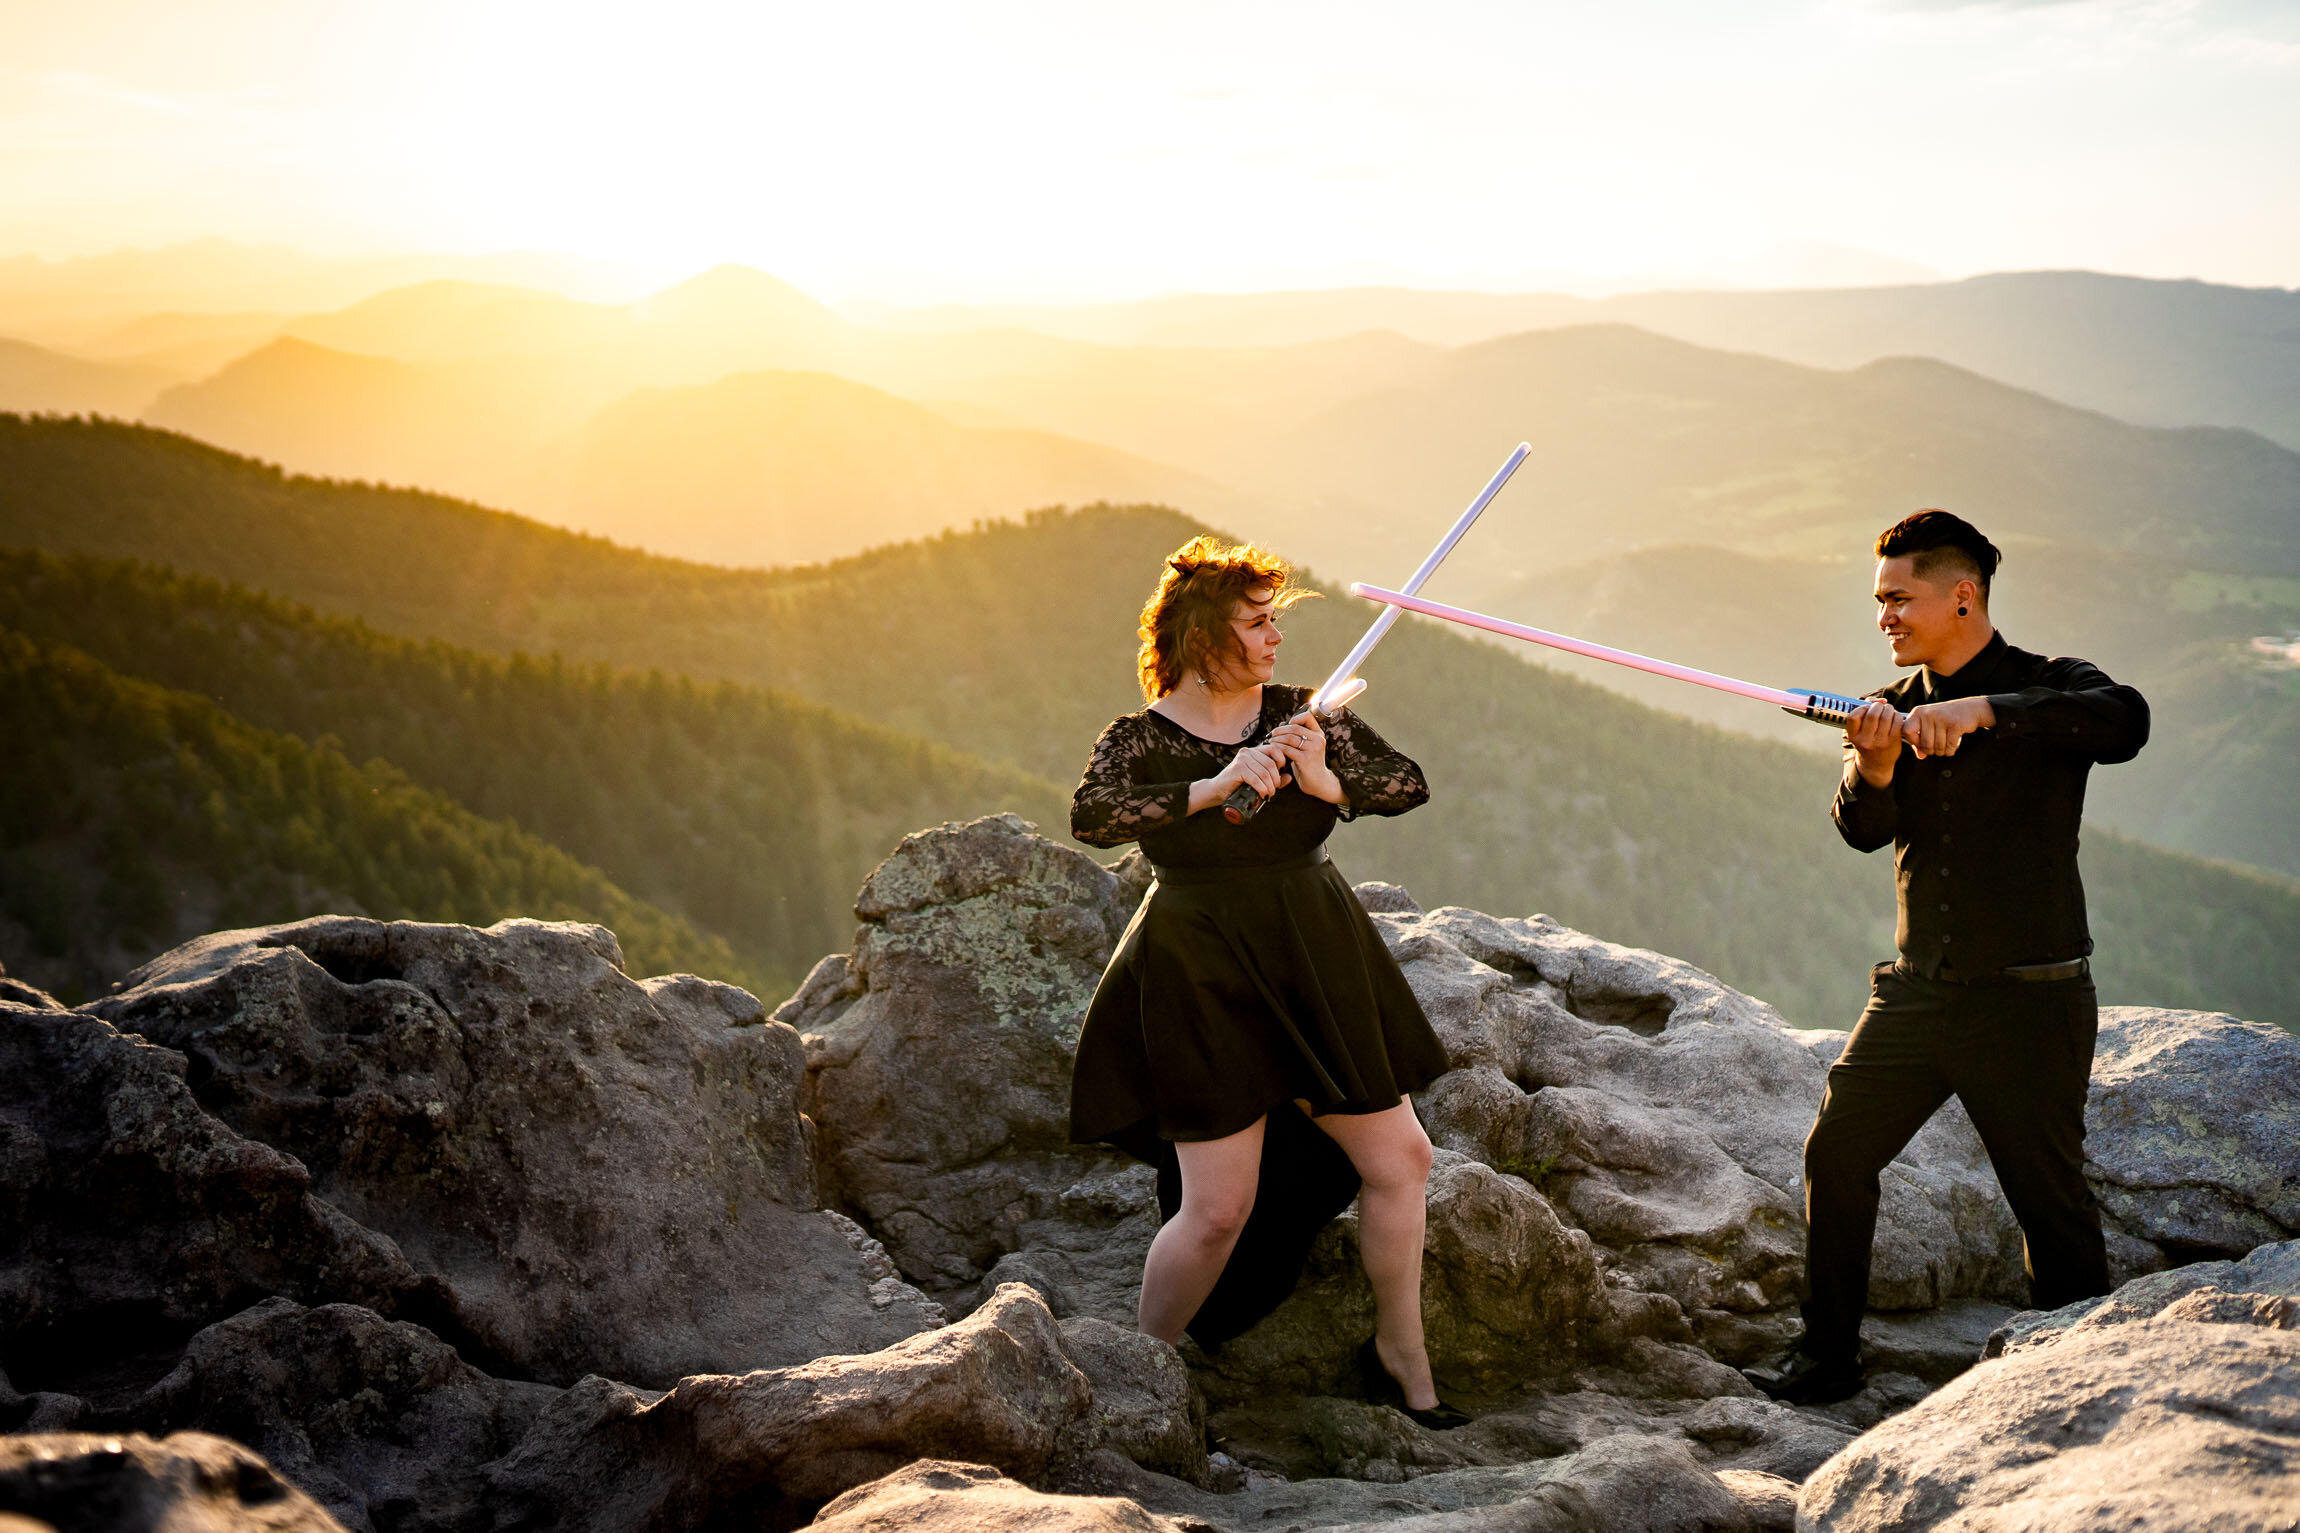 Engaged couple jumps into cosplay with their light sabers on a rocky ledge overlooking the mountains during golden hour, Engagement Session, Engagement Photos, Engagement Photos Inspiration, Engagement Photography, Engagement Photographer, Summer Engagement Photos, Mountain Engagement Photos, Lost Gulch Overlook engagement session, Lost Gulch Overlook engagement photos, Lost Gulch Overlook engagement photography, Lost Gulch Overlook engagement photographer, Lost Gulch Overlook  engagement inspiration, Boulder engagement session, Boulder engagement photos, Boulder engagement photography, Boulder engagement photographer, Boulder engagement inspiration, Colorado engagement session, Colorado engagement photos, Colorado engagement photography, Colorado engagement photographer, Colorado engagement inspiration